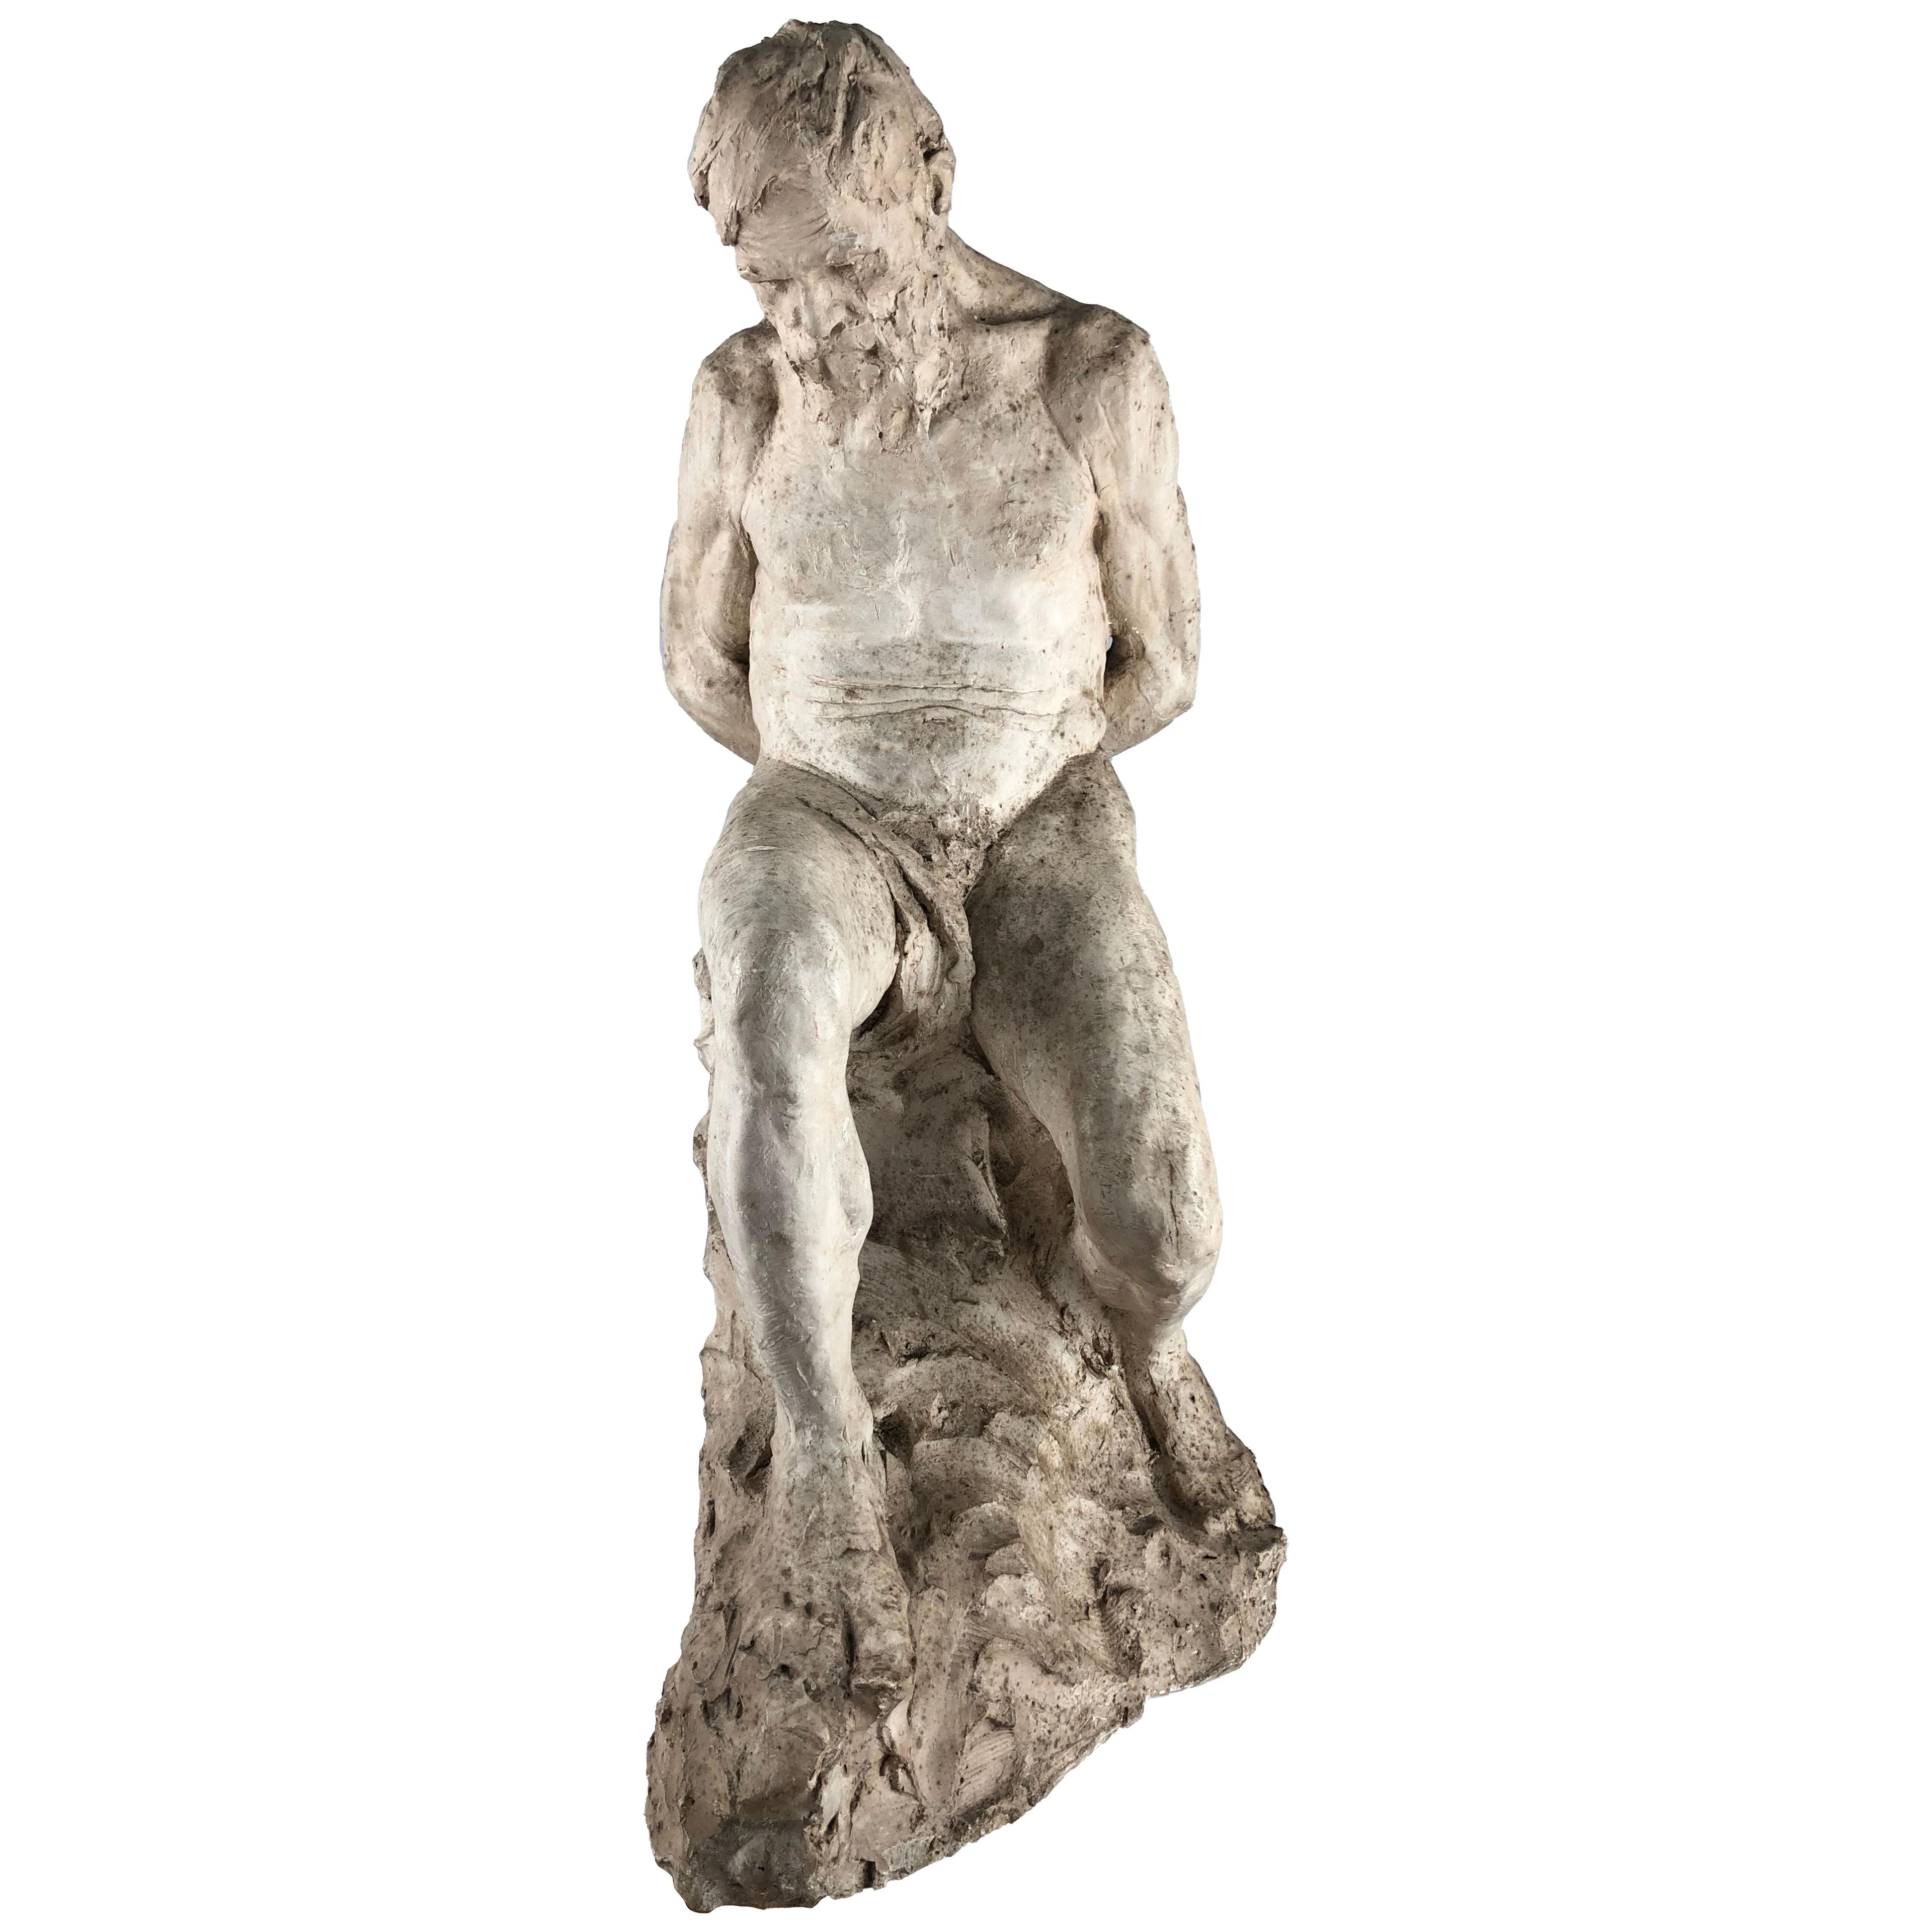 Sculpture signed Gallé and dated -93 (1893). (plaster)